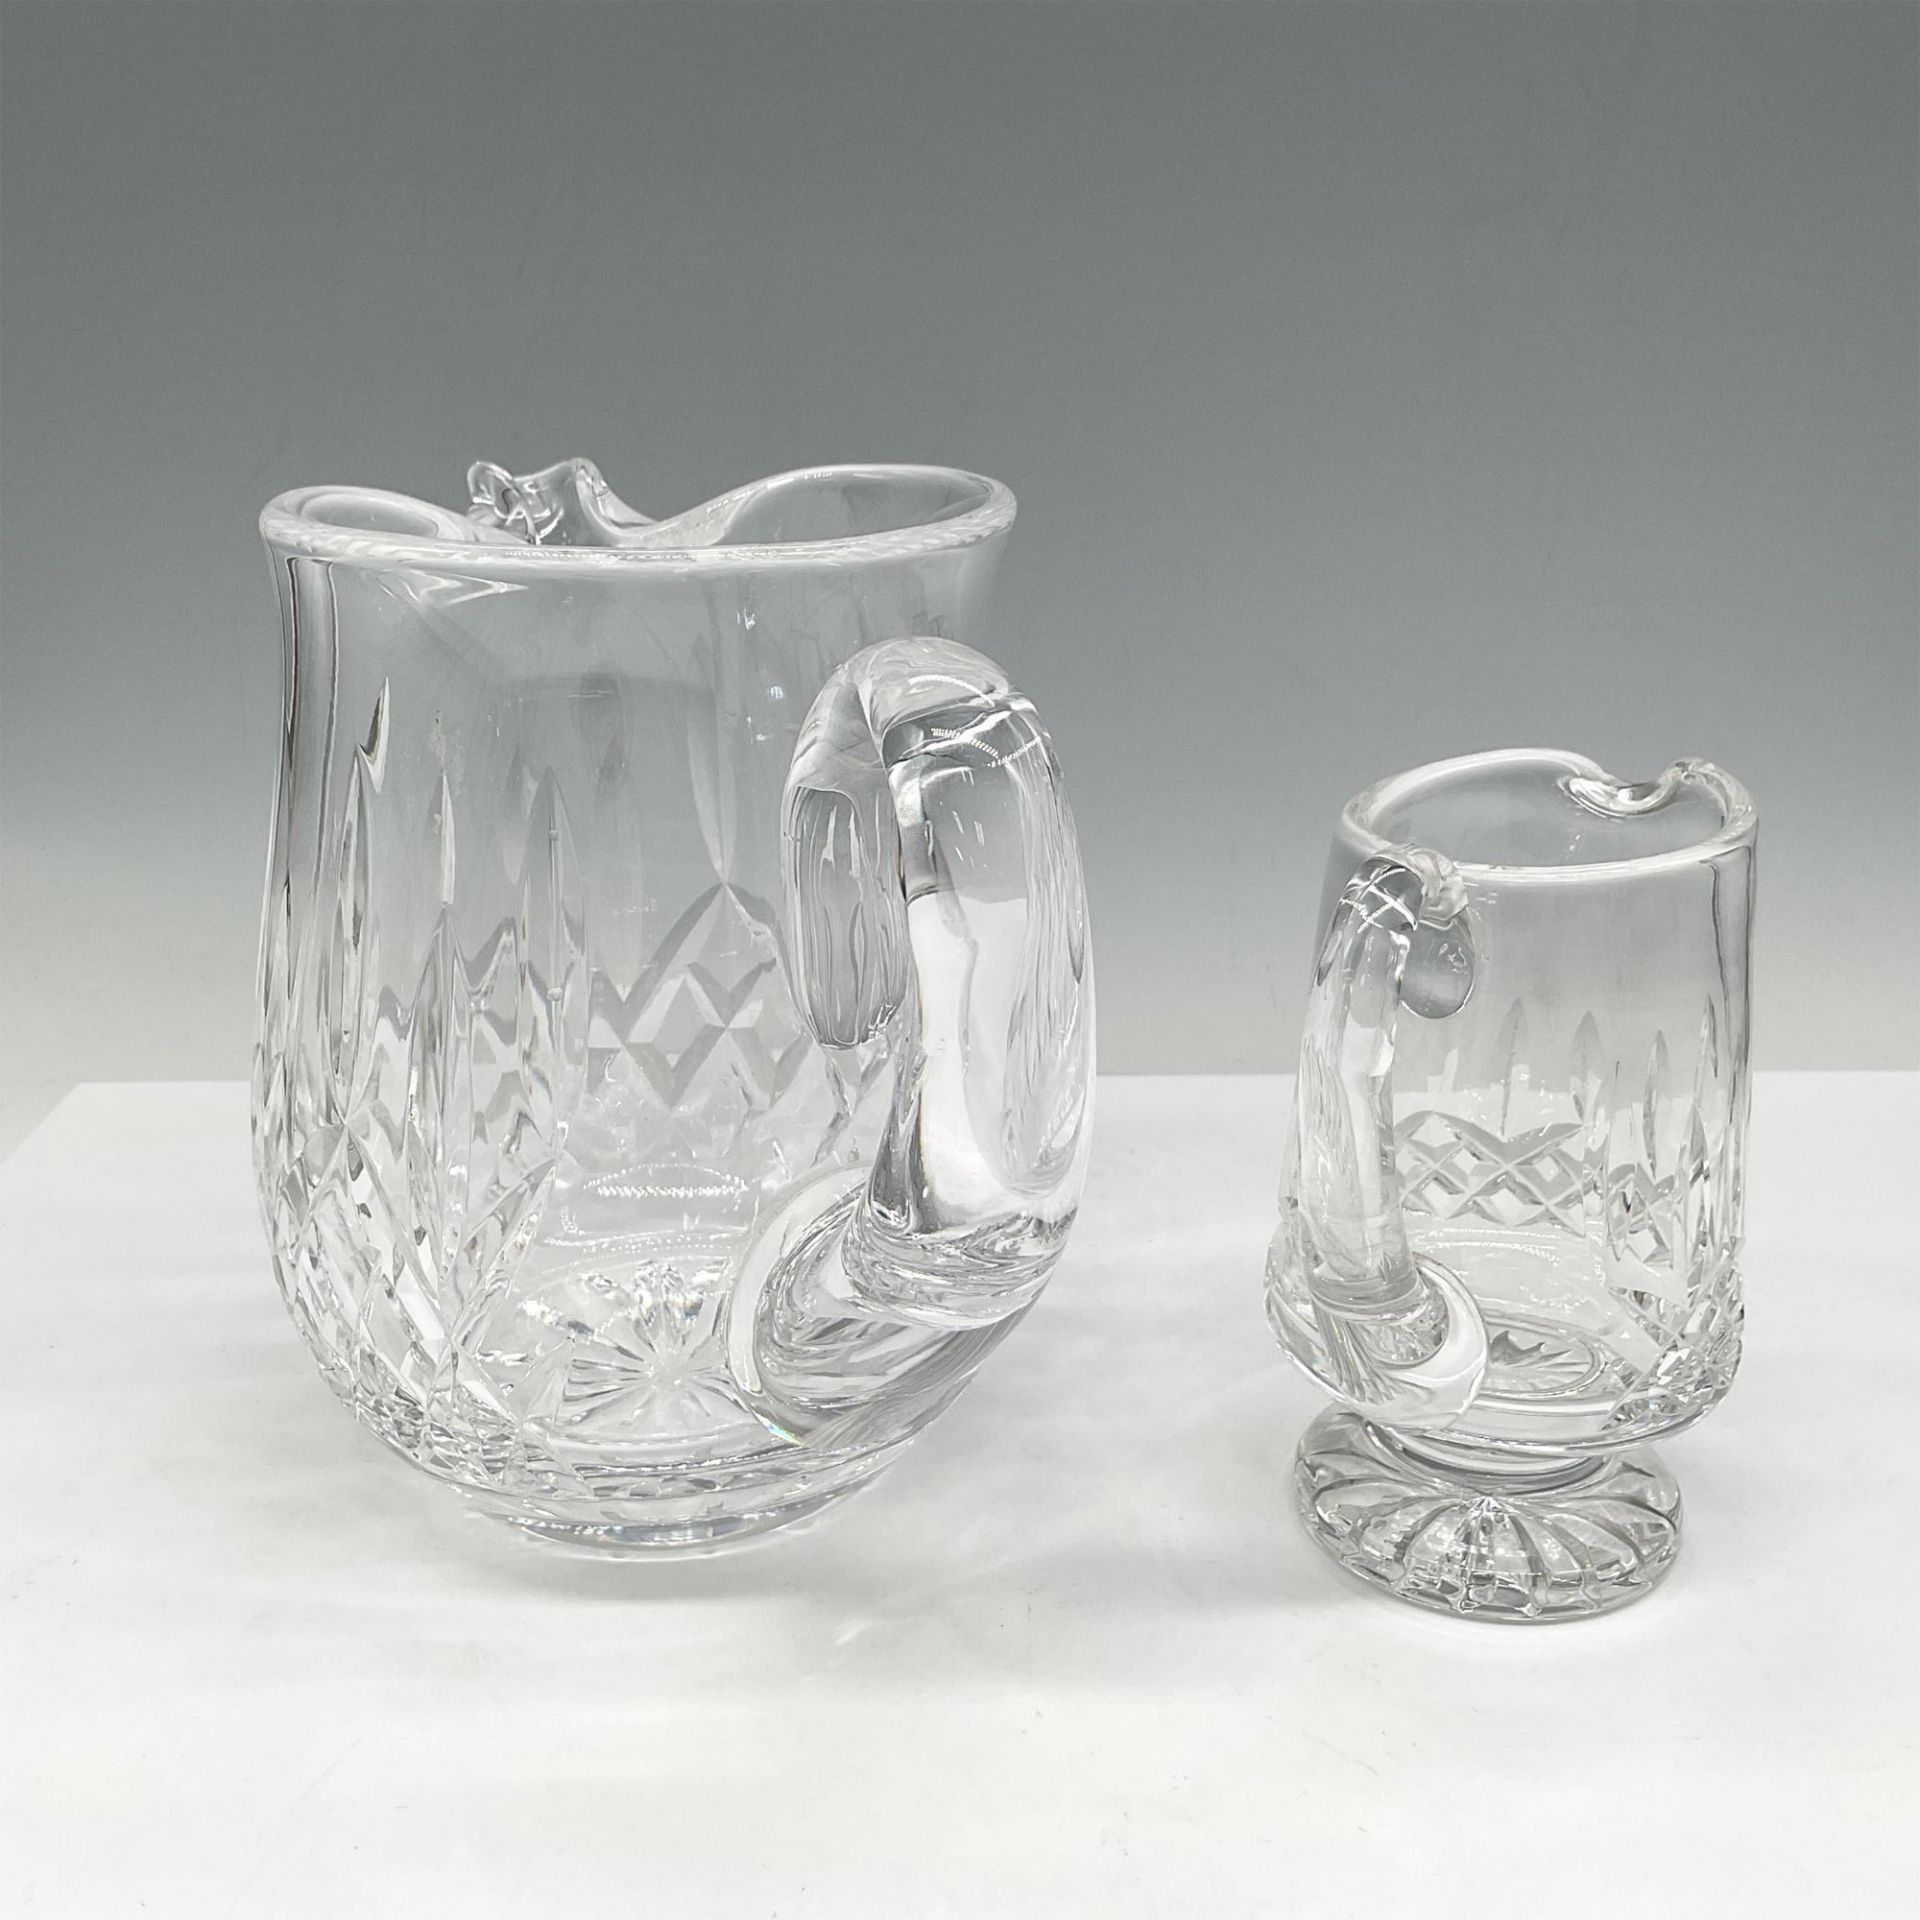 2pc Waterford Crystal Pitcher and Cream Jug - Image 3 of 3